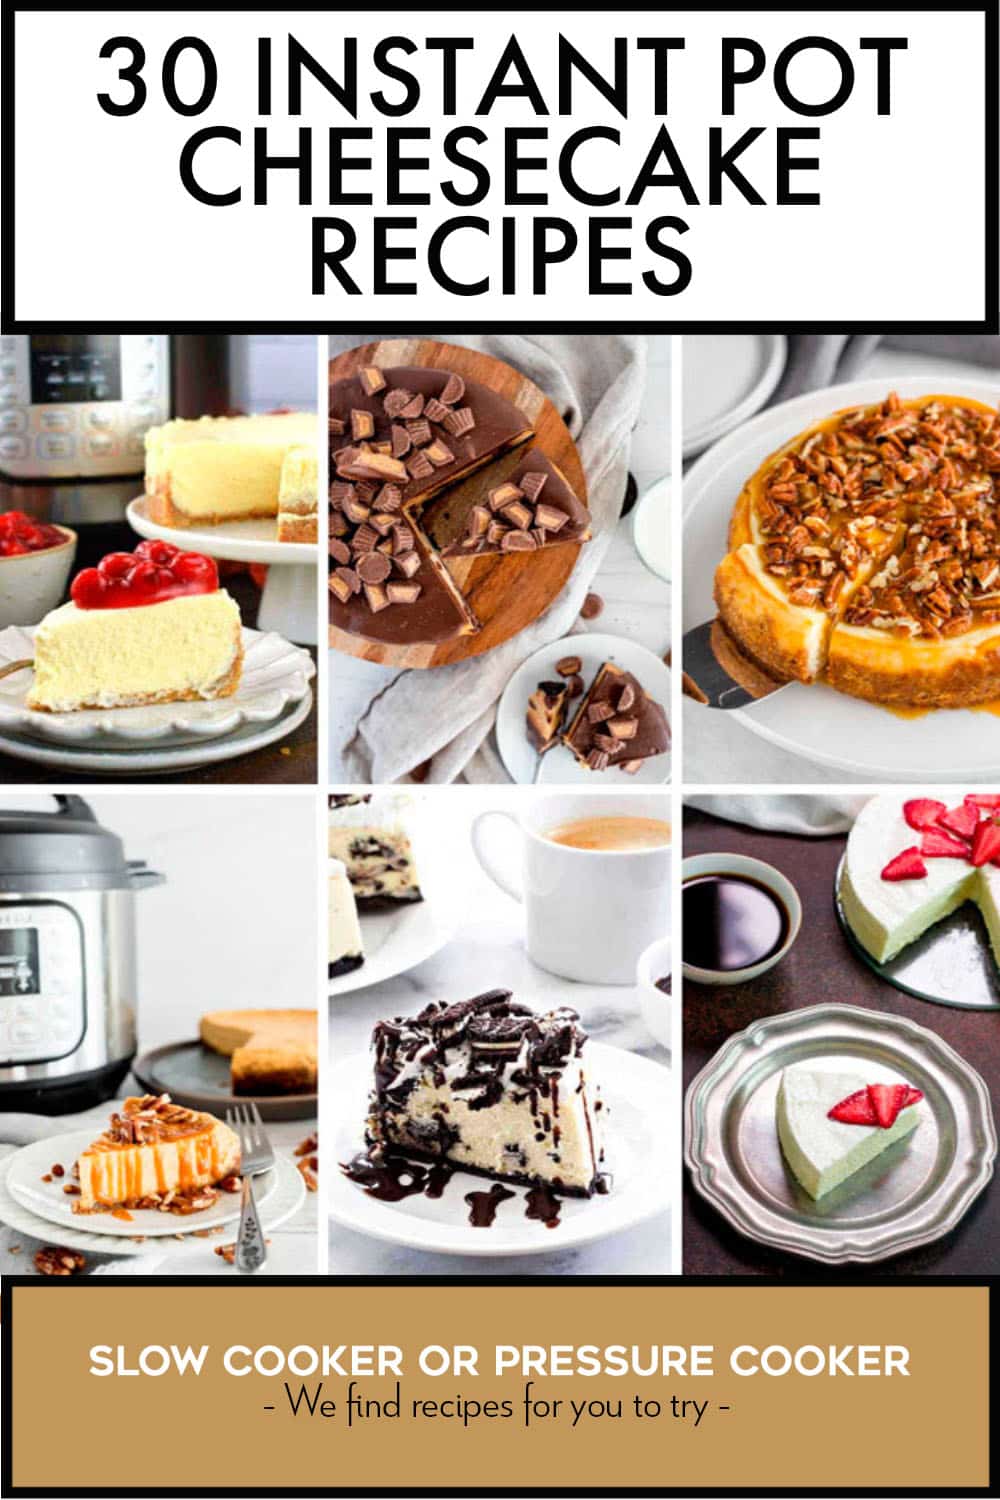 https://www.slowcookerfromscratch.com/wp-content/uploads/2022/12/30-INSTANT-POT-CHEESECAKE-RECIPES-1-copy.jpg